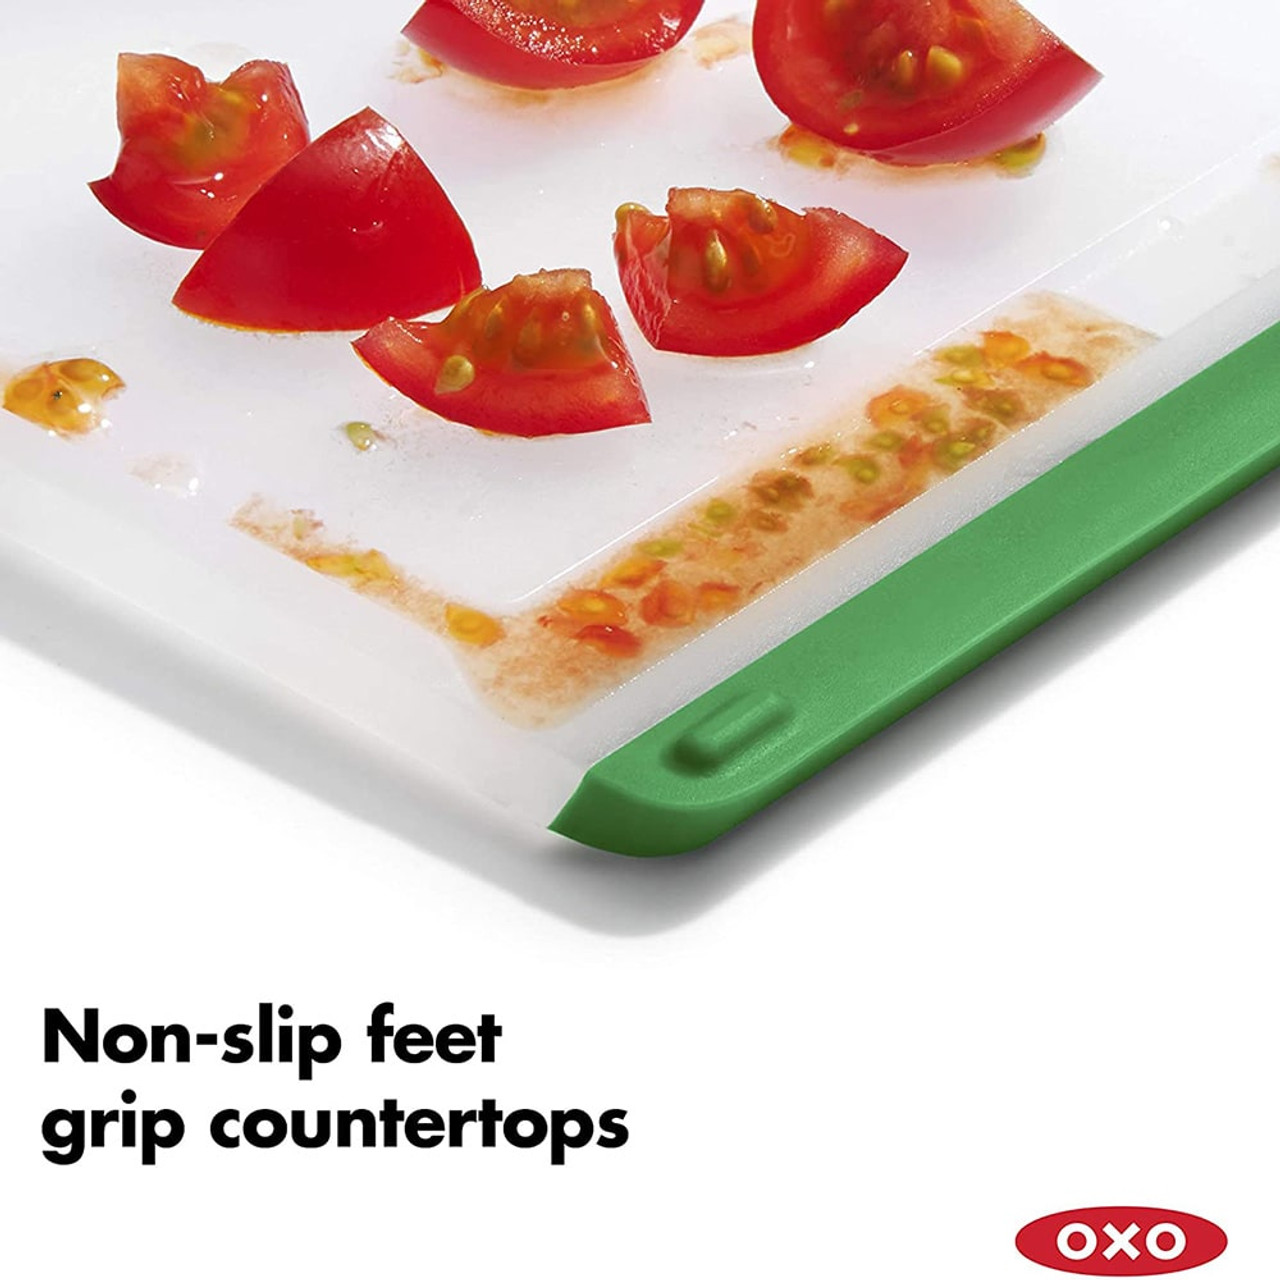 https://cdn11.bigcommerce.com/s-hccytny0od/images/stencil/1280x1280/products/4012/14718/oxo-good-grips-3pc-everyday-cutting-board-set-2__59798.1618145842.jpg?c=2?imbypass=on